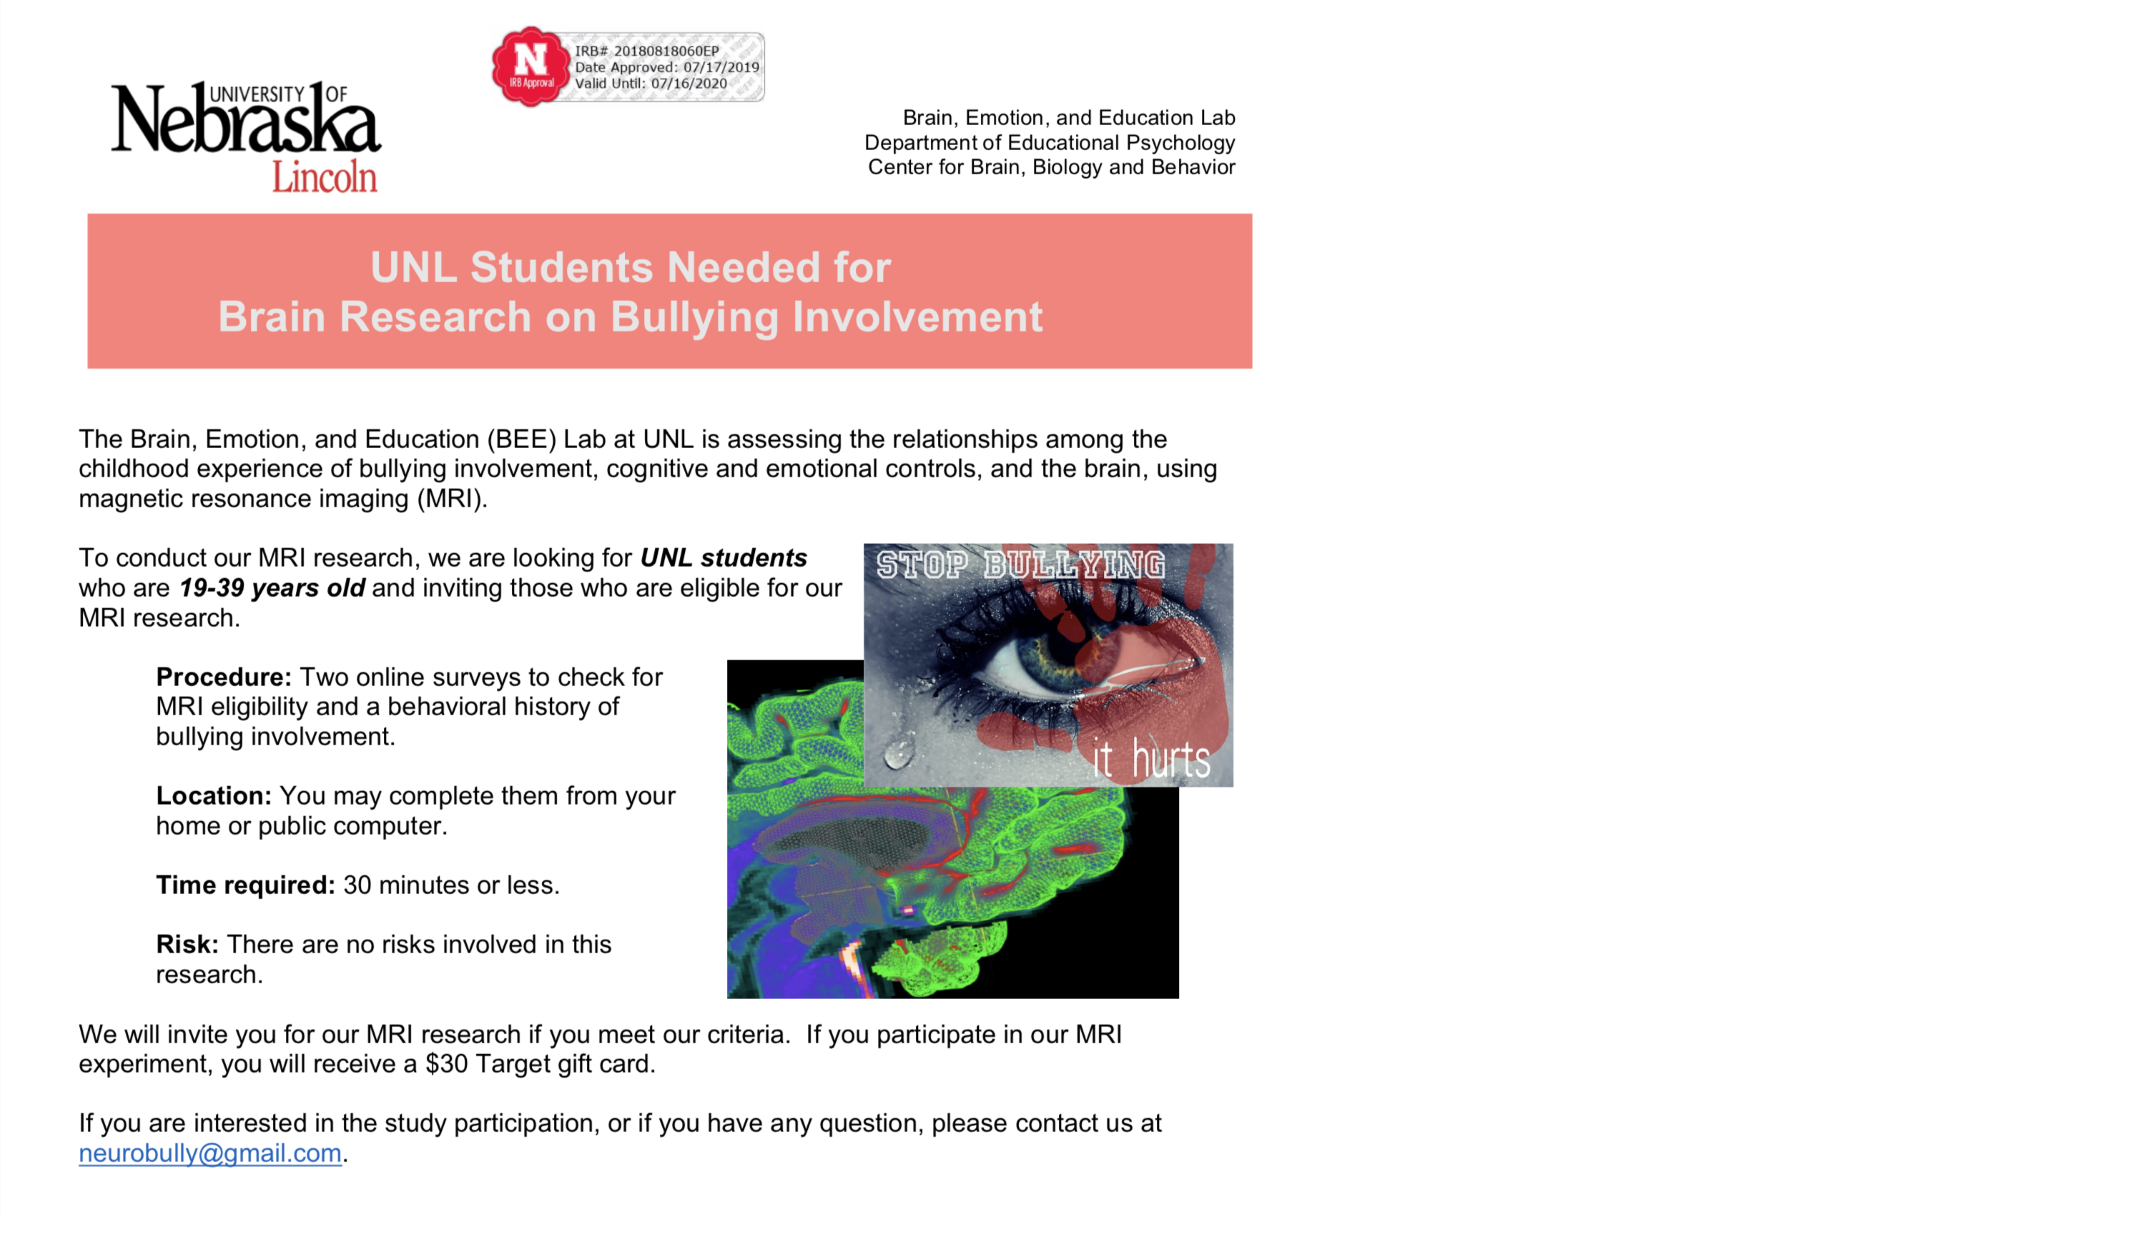 UNL students needed for brain research on bullying involvement.